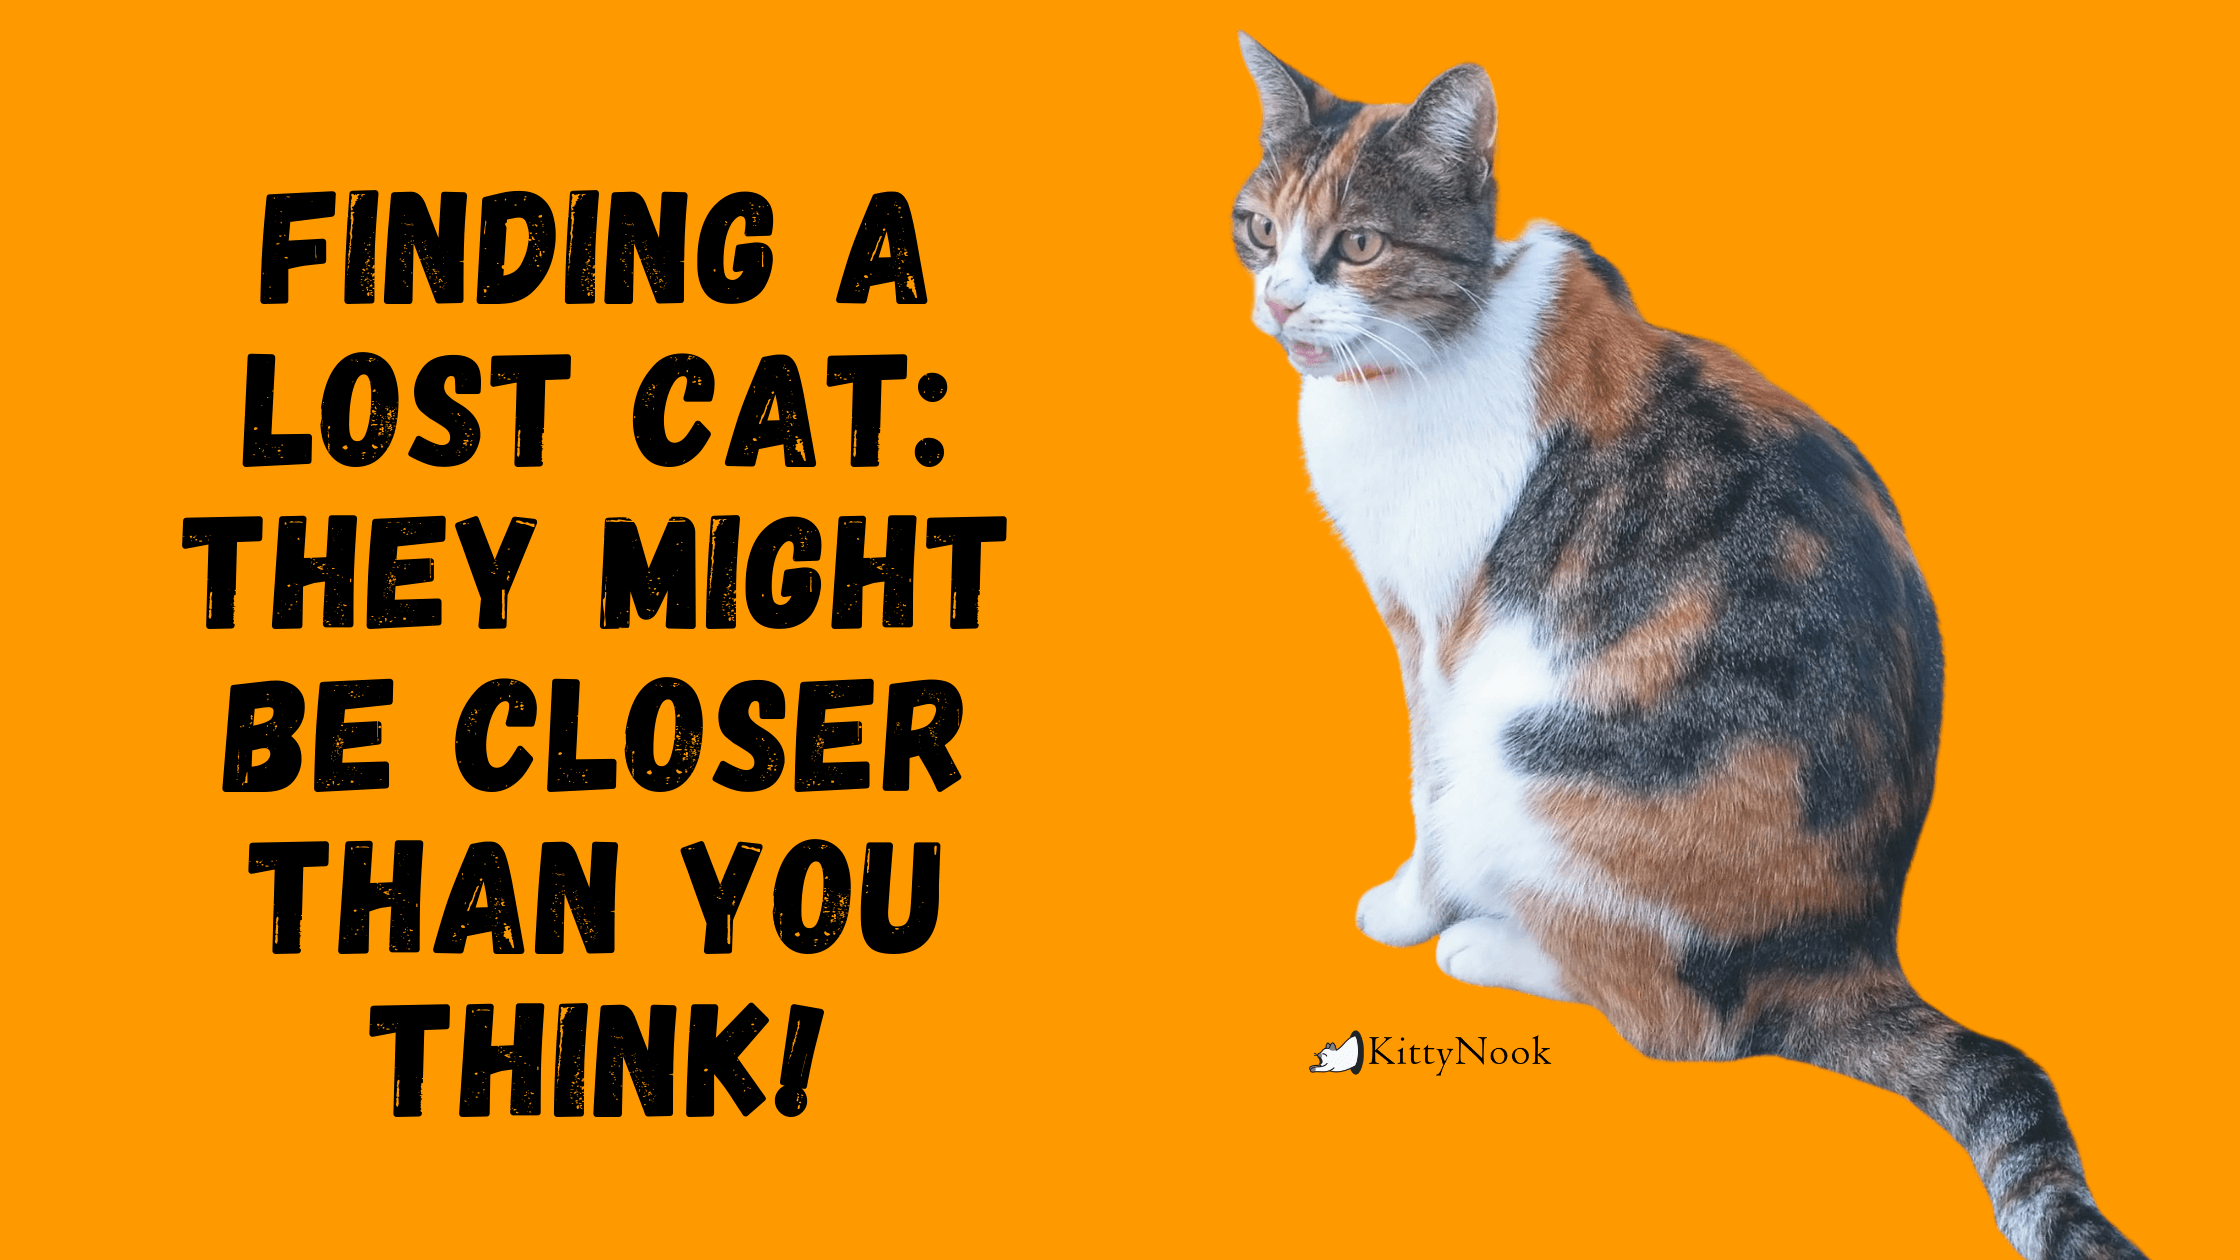 Finding A Lost Cat: They Might be Closer Than You Think! - KittyNook Cat Company